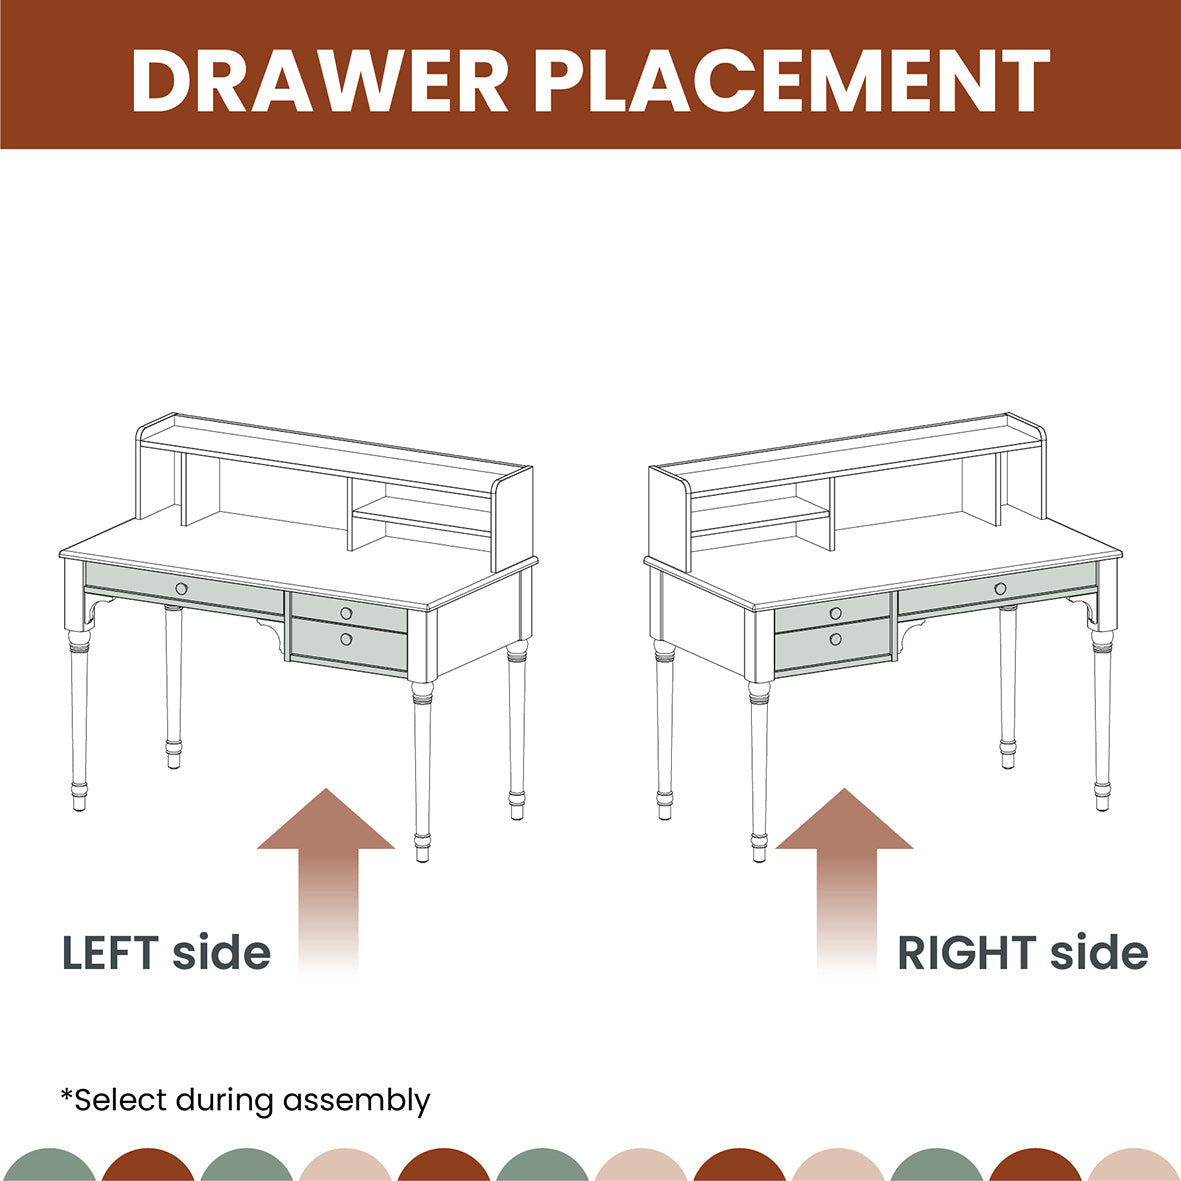 Diagram illustrating drawer placement options in an assembly manual for a versatile Pedestal desk, with arrows indicating a left side installation option and a right side installation option.